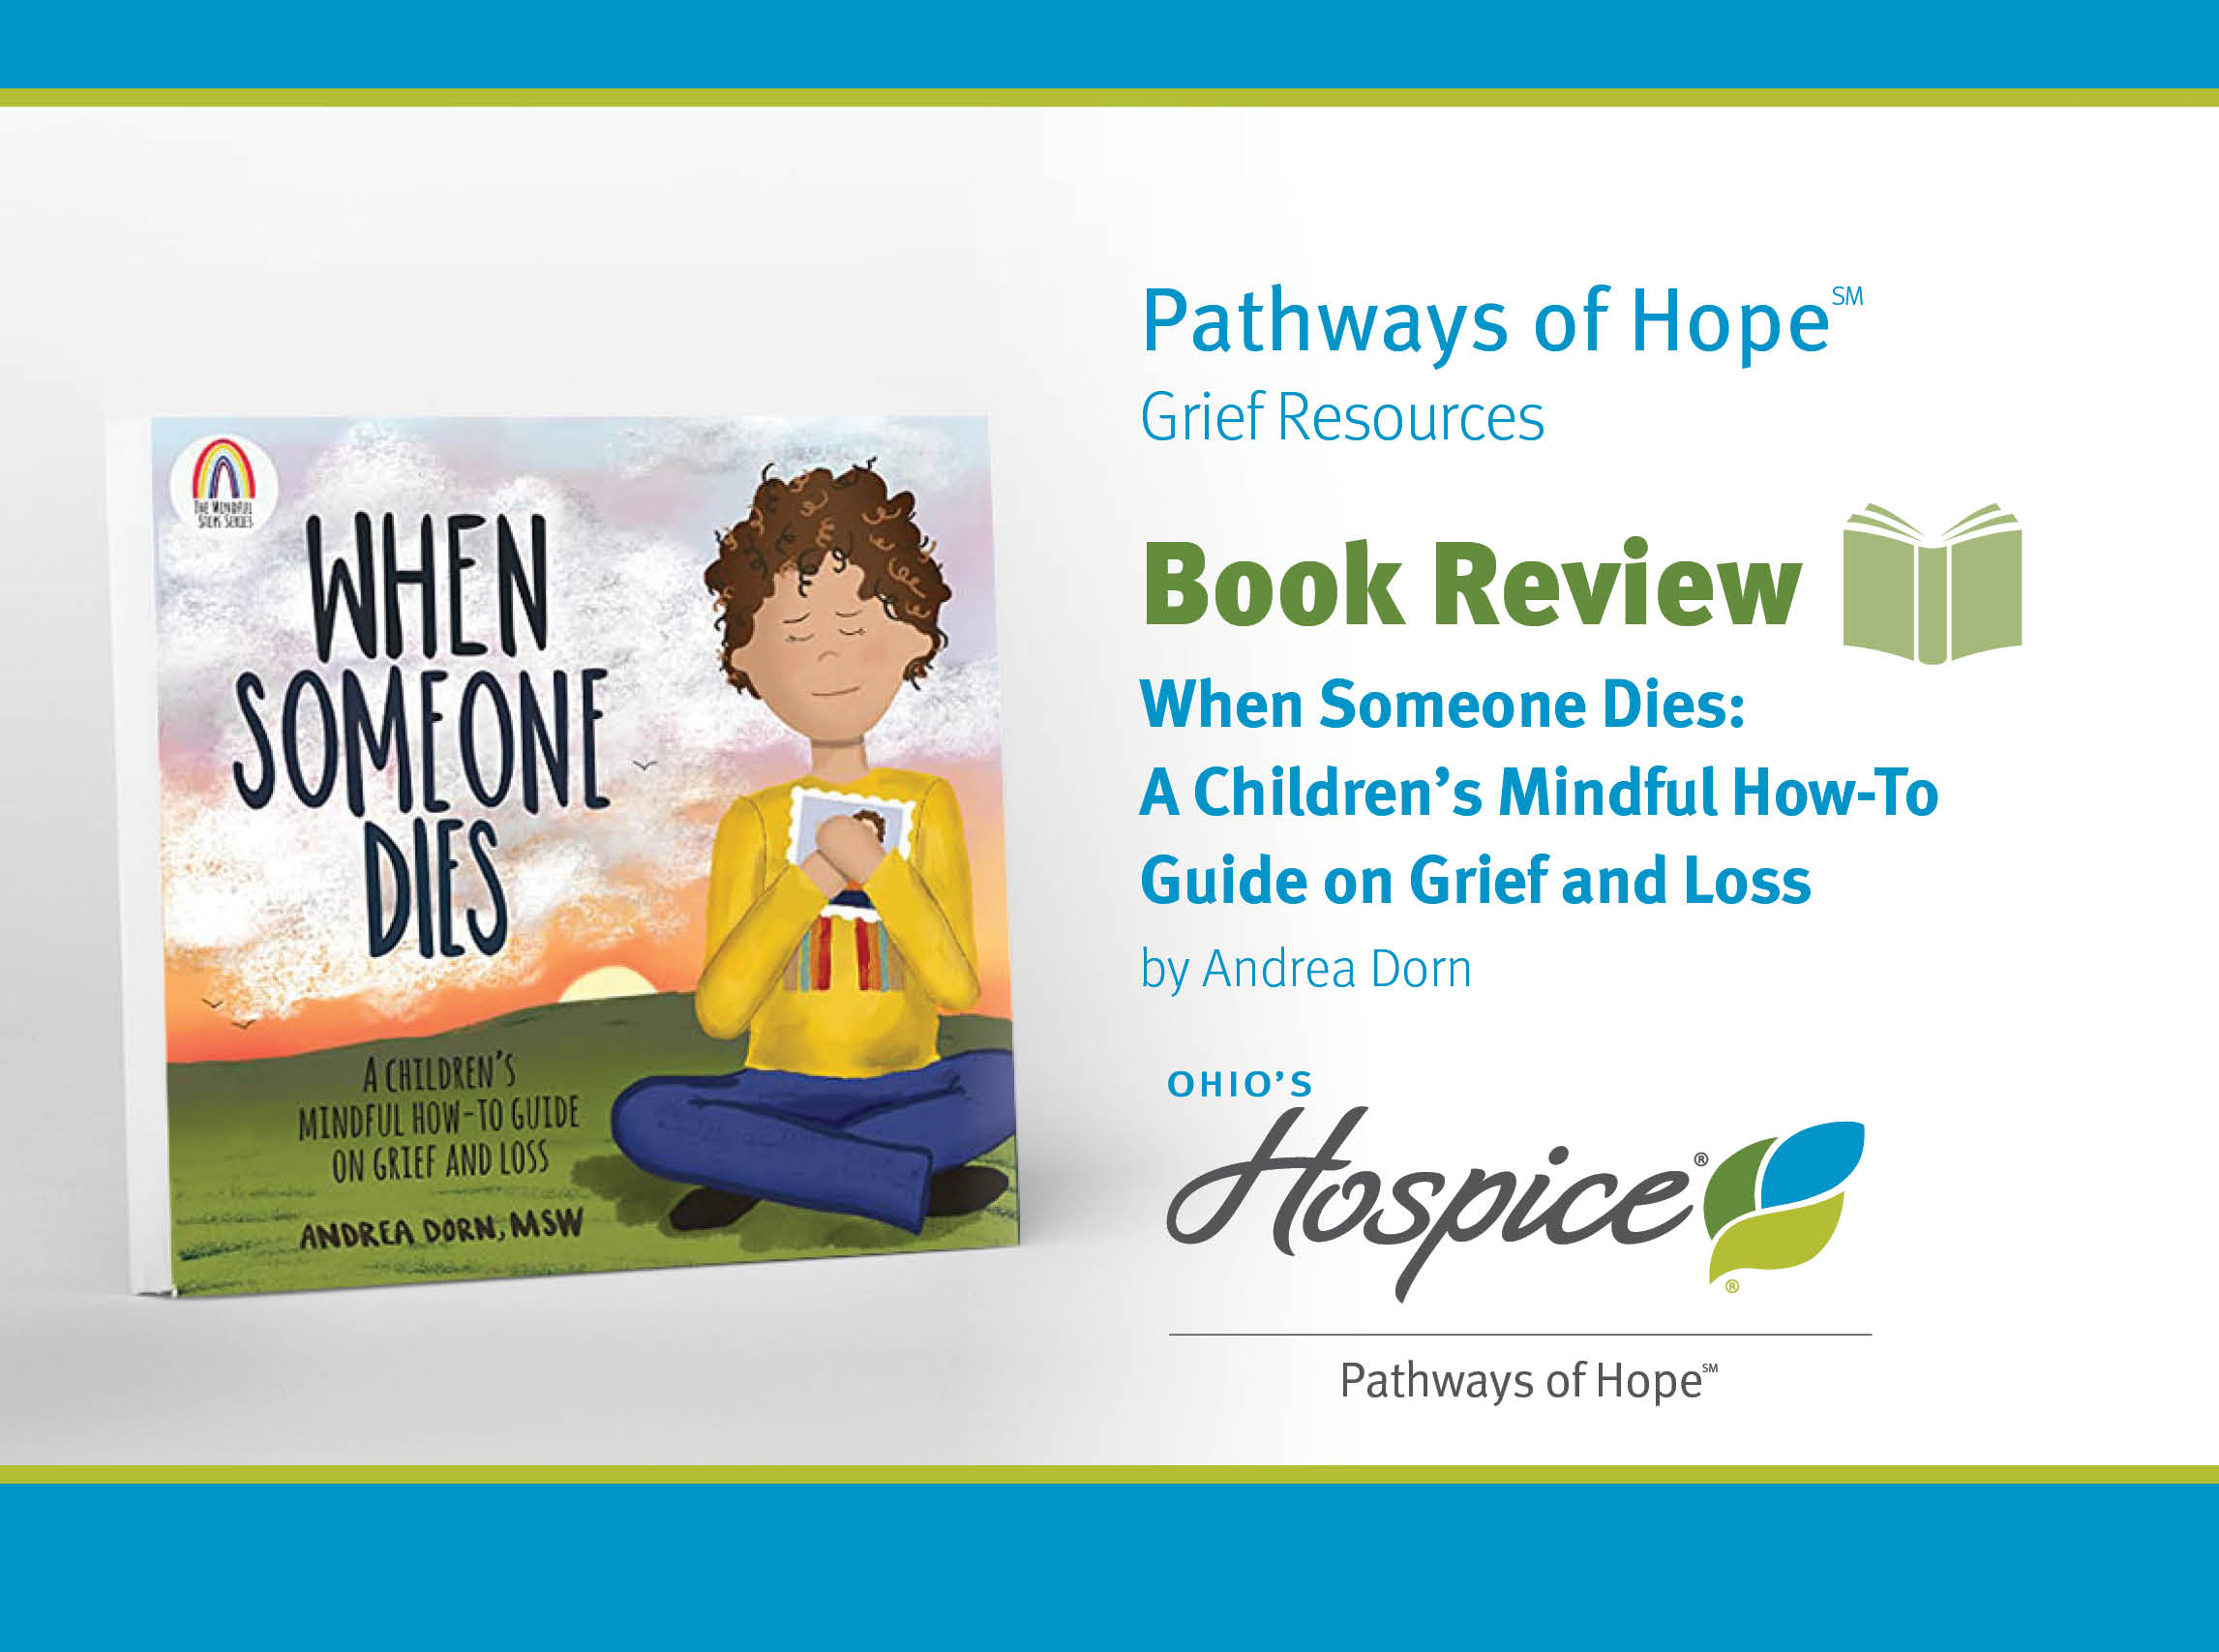 Pathways of Hope. Grief Resources. Book Review. When Someone Dies: A Children's Mindful How-to Guide on Grief and Loss. By Andrea Dorn. Ohio's Hospice Pathways of Hope.